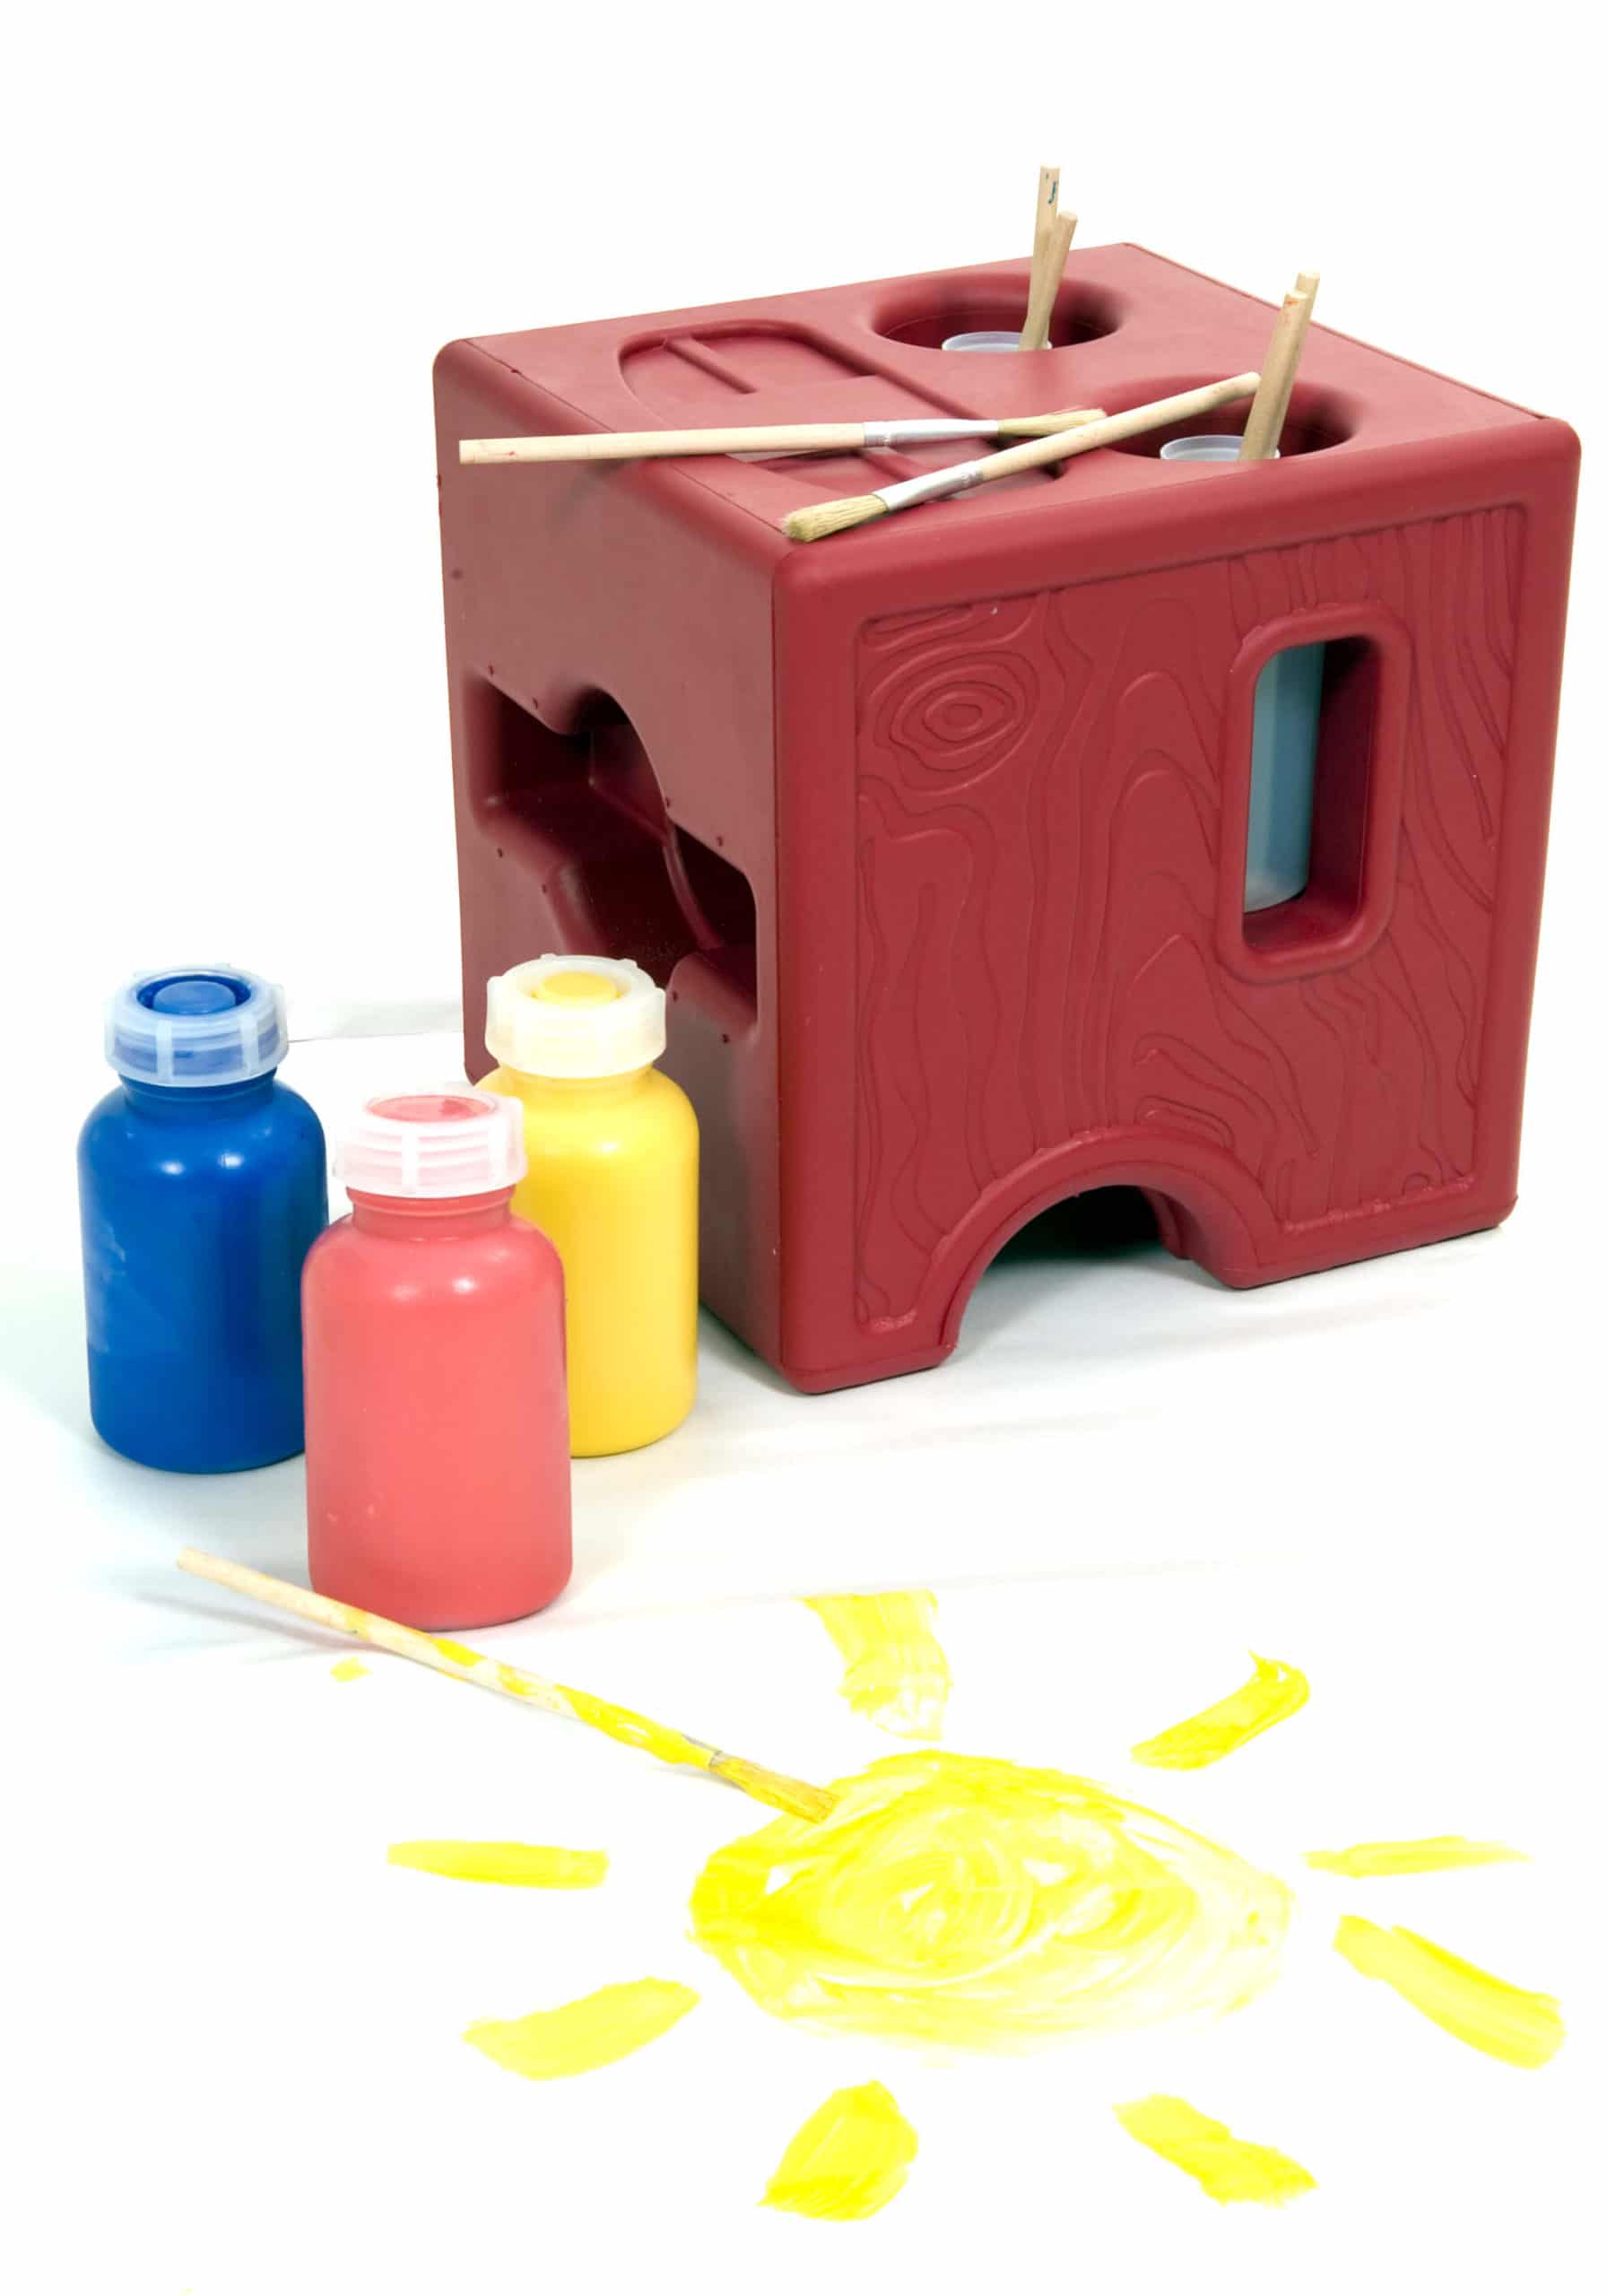 Playspace Design Poddely painting set